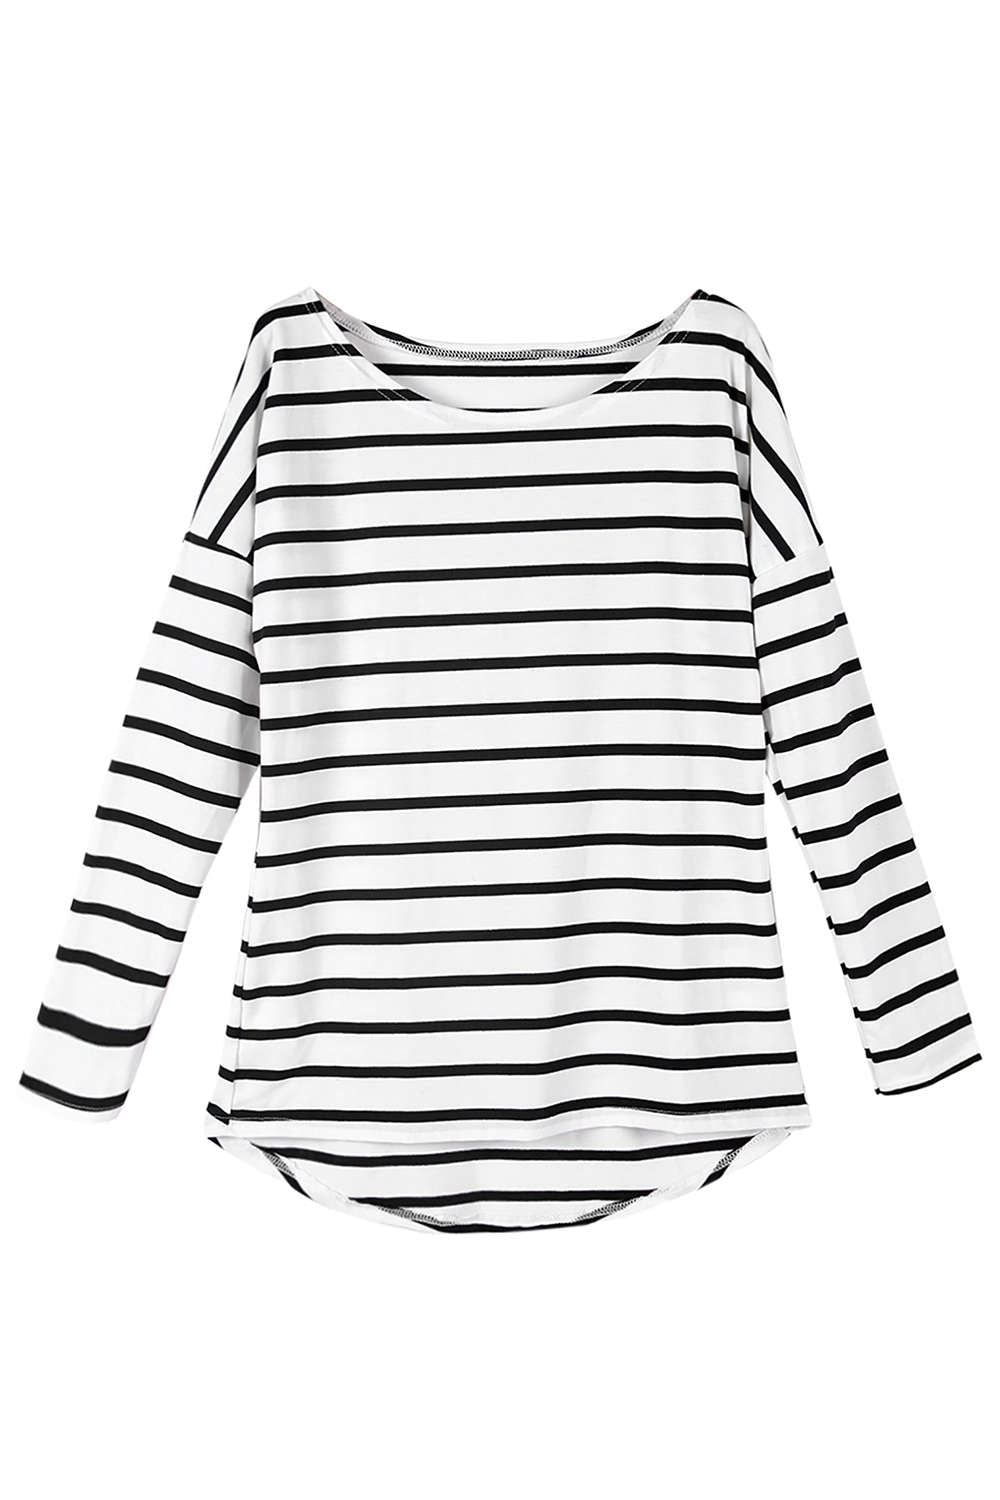 Iyasson Women's Scooped Neckline Striped Casual T-Shirt 